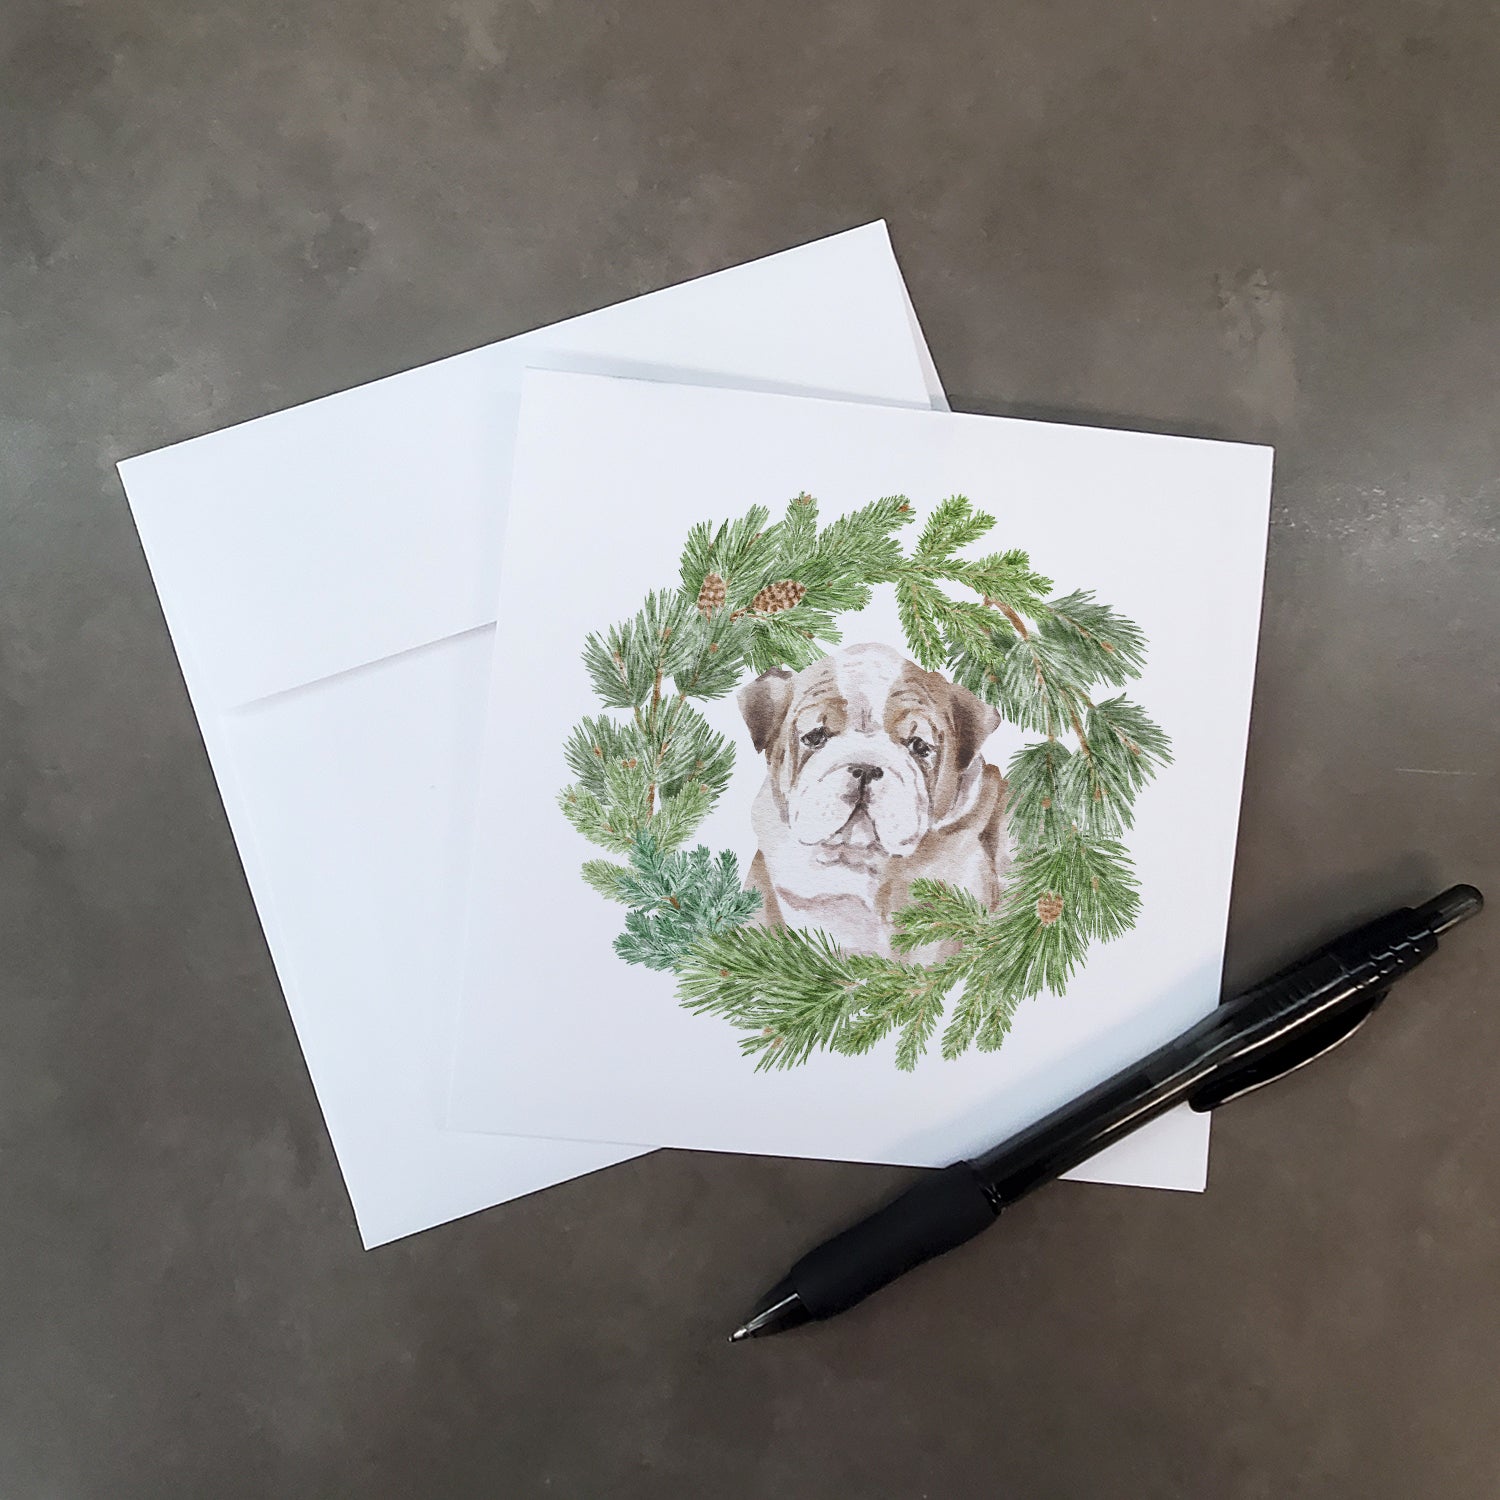 Bulldog Puppy Fawn Brindle with Christmas Wreath Square Greeting Cards and Envelopes Pack of 8 - the-store.com